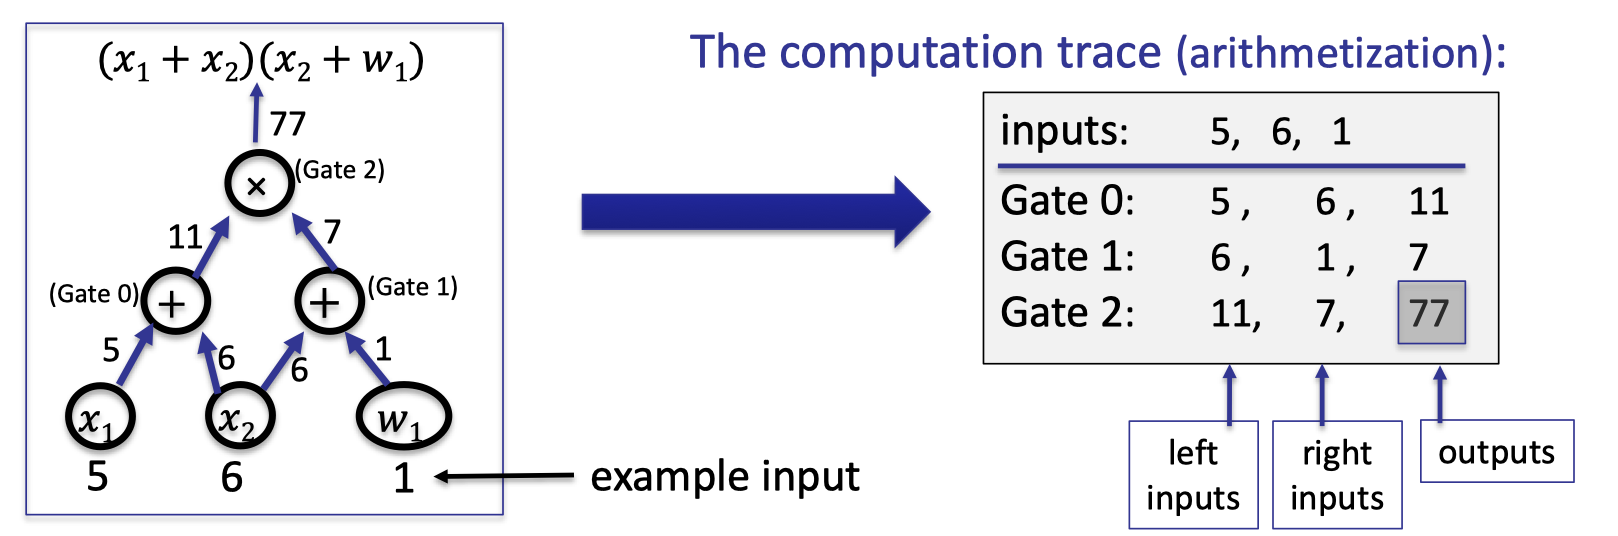 arithmetization: compile the circuit to a computation trace